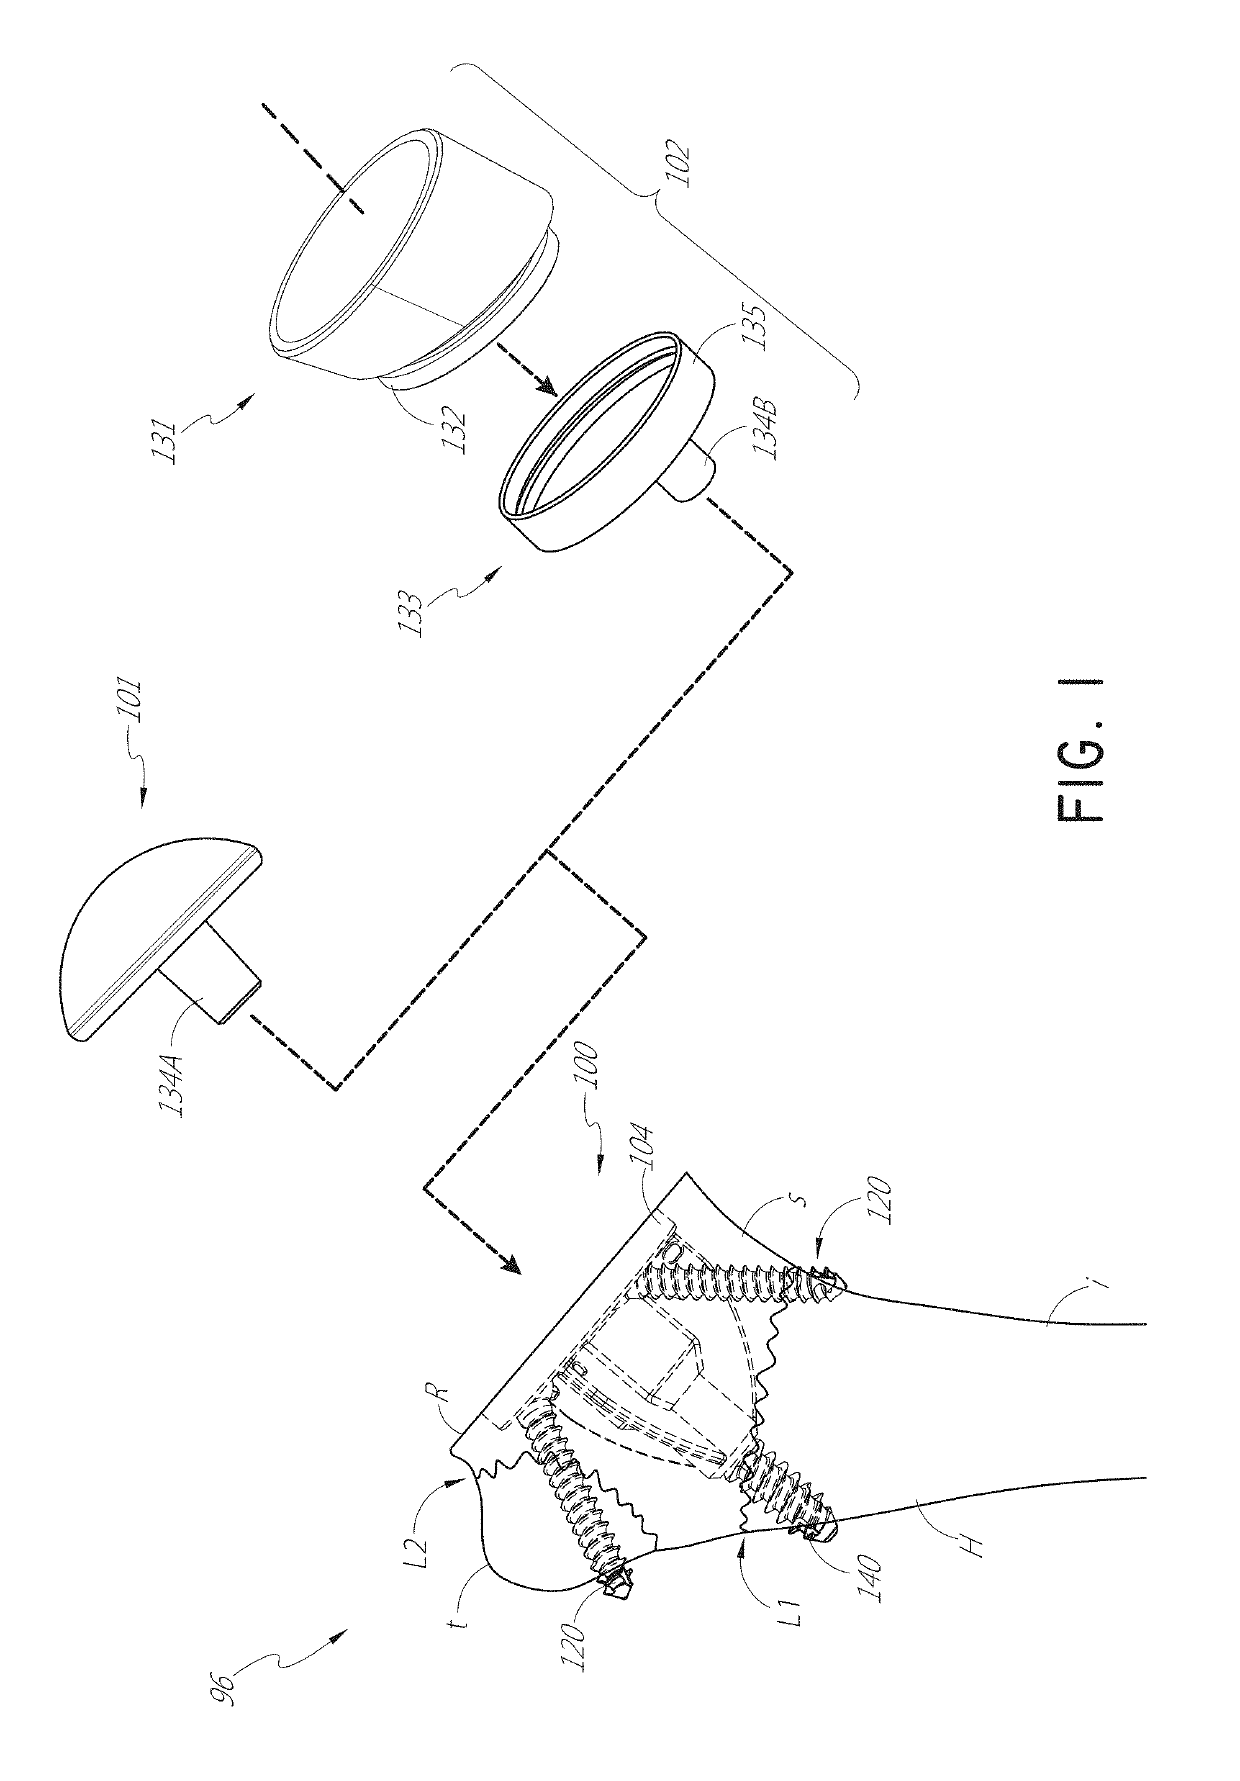 Stemless shoulder implant with fixation components